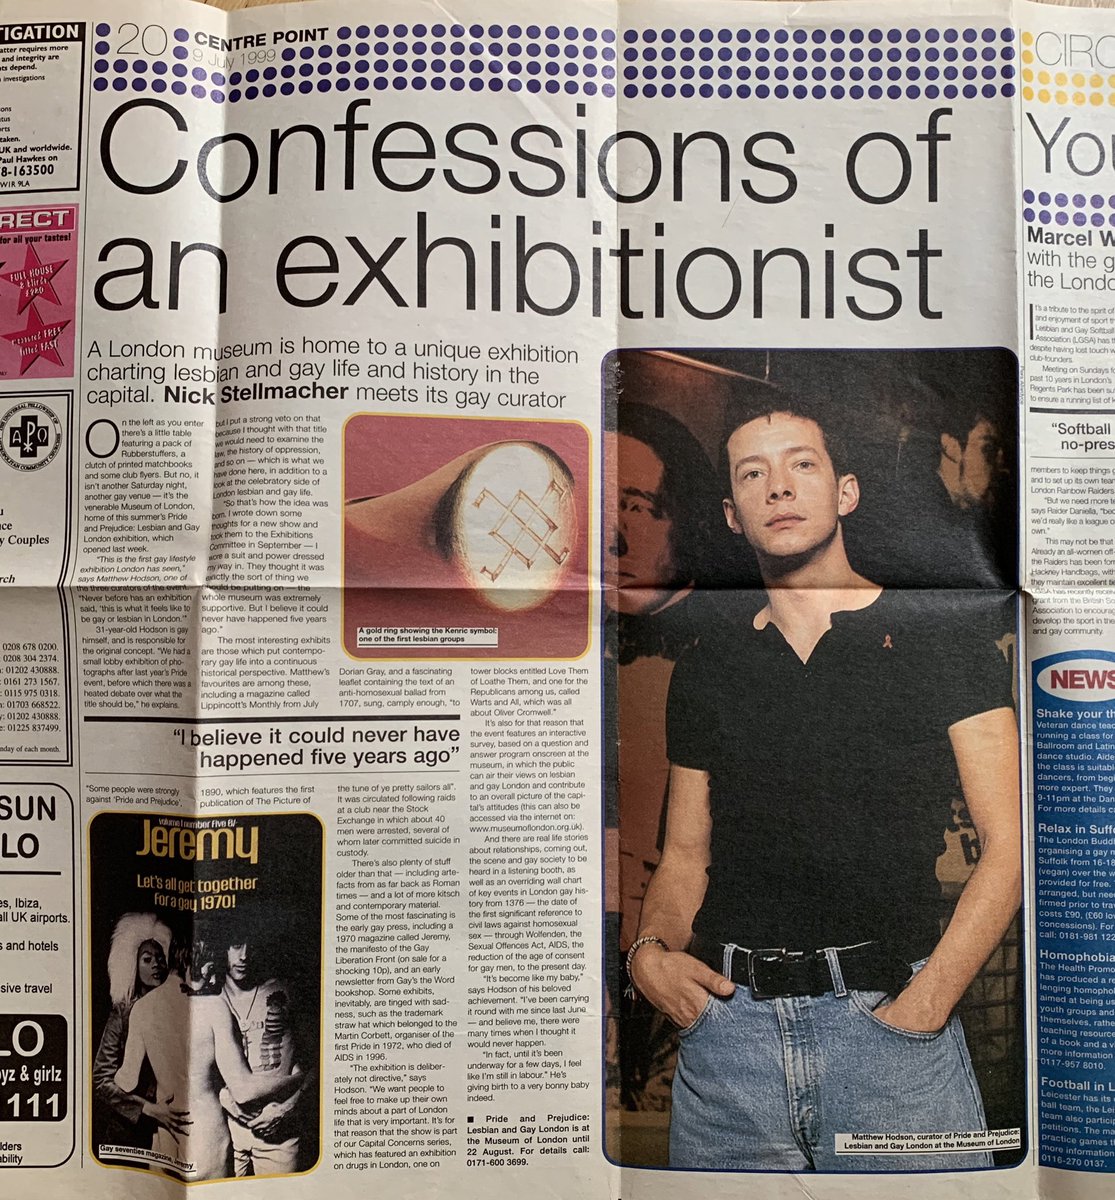 In 1999 I conceived and co-curated Pride and Prejudice, the first ever exhibition about LGBTQ+ lives to be held at a major UK museum (@MuseumofLondon). Too often our lives are unrecorded, erased or dismissed. This is why preserving and celebrating our history matters. #LGBTplusHM